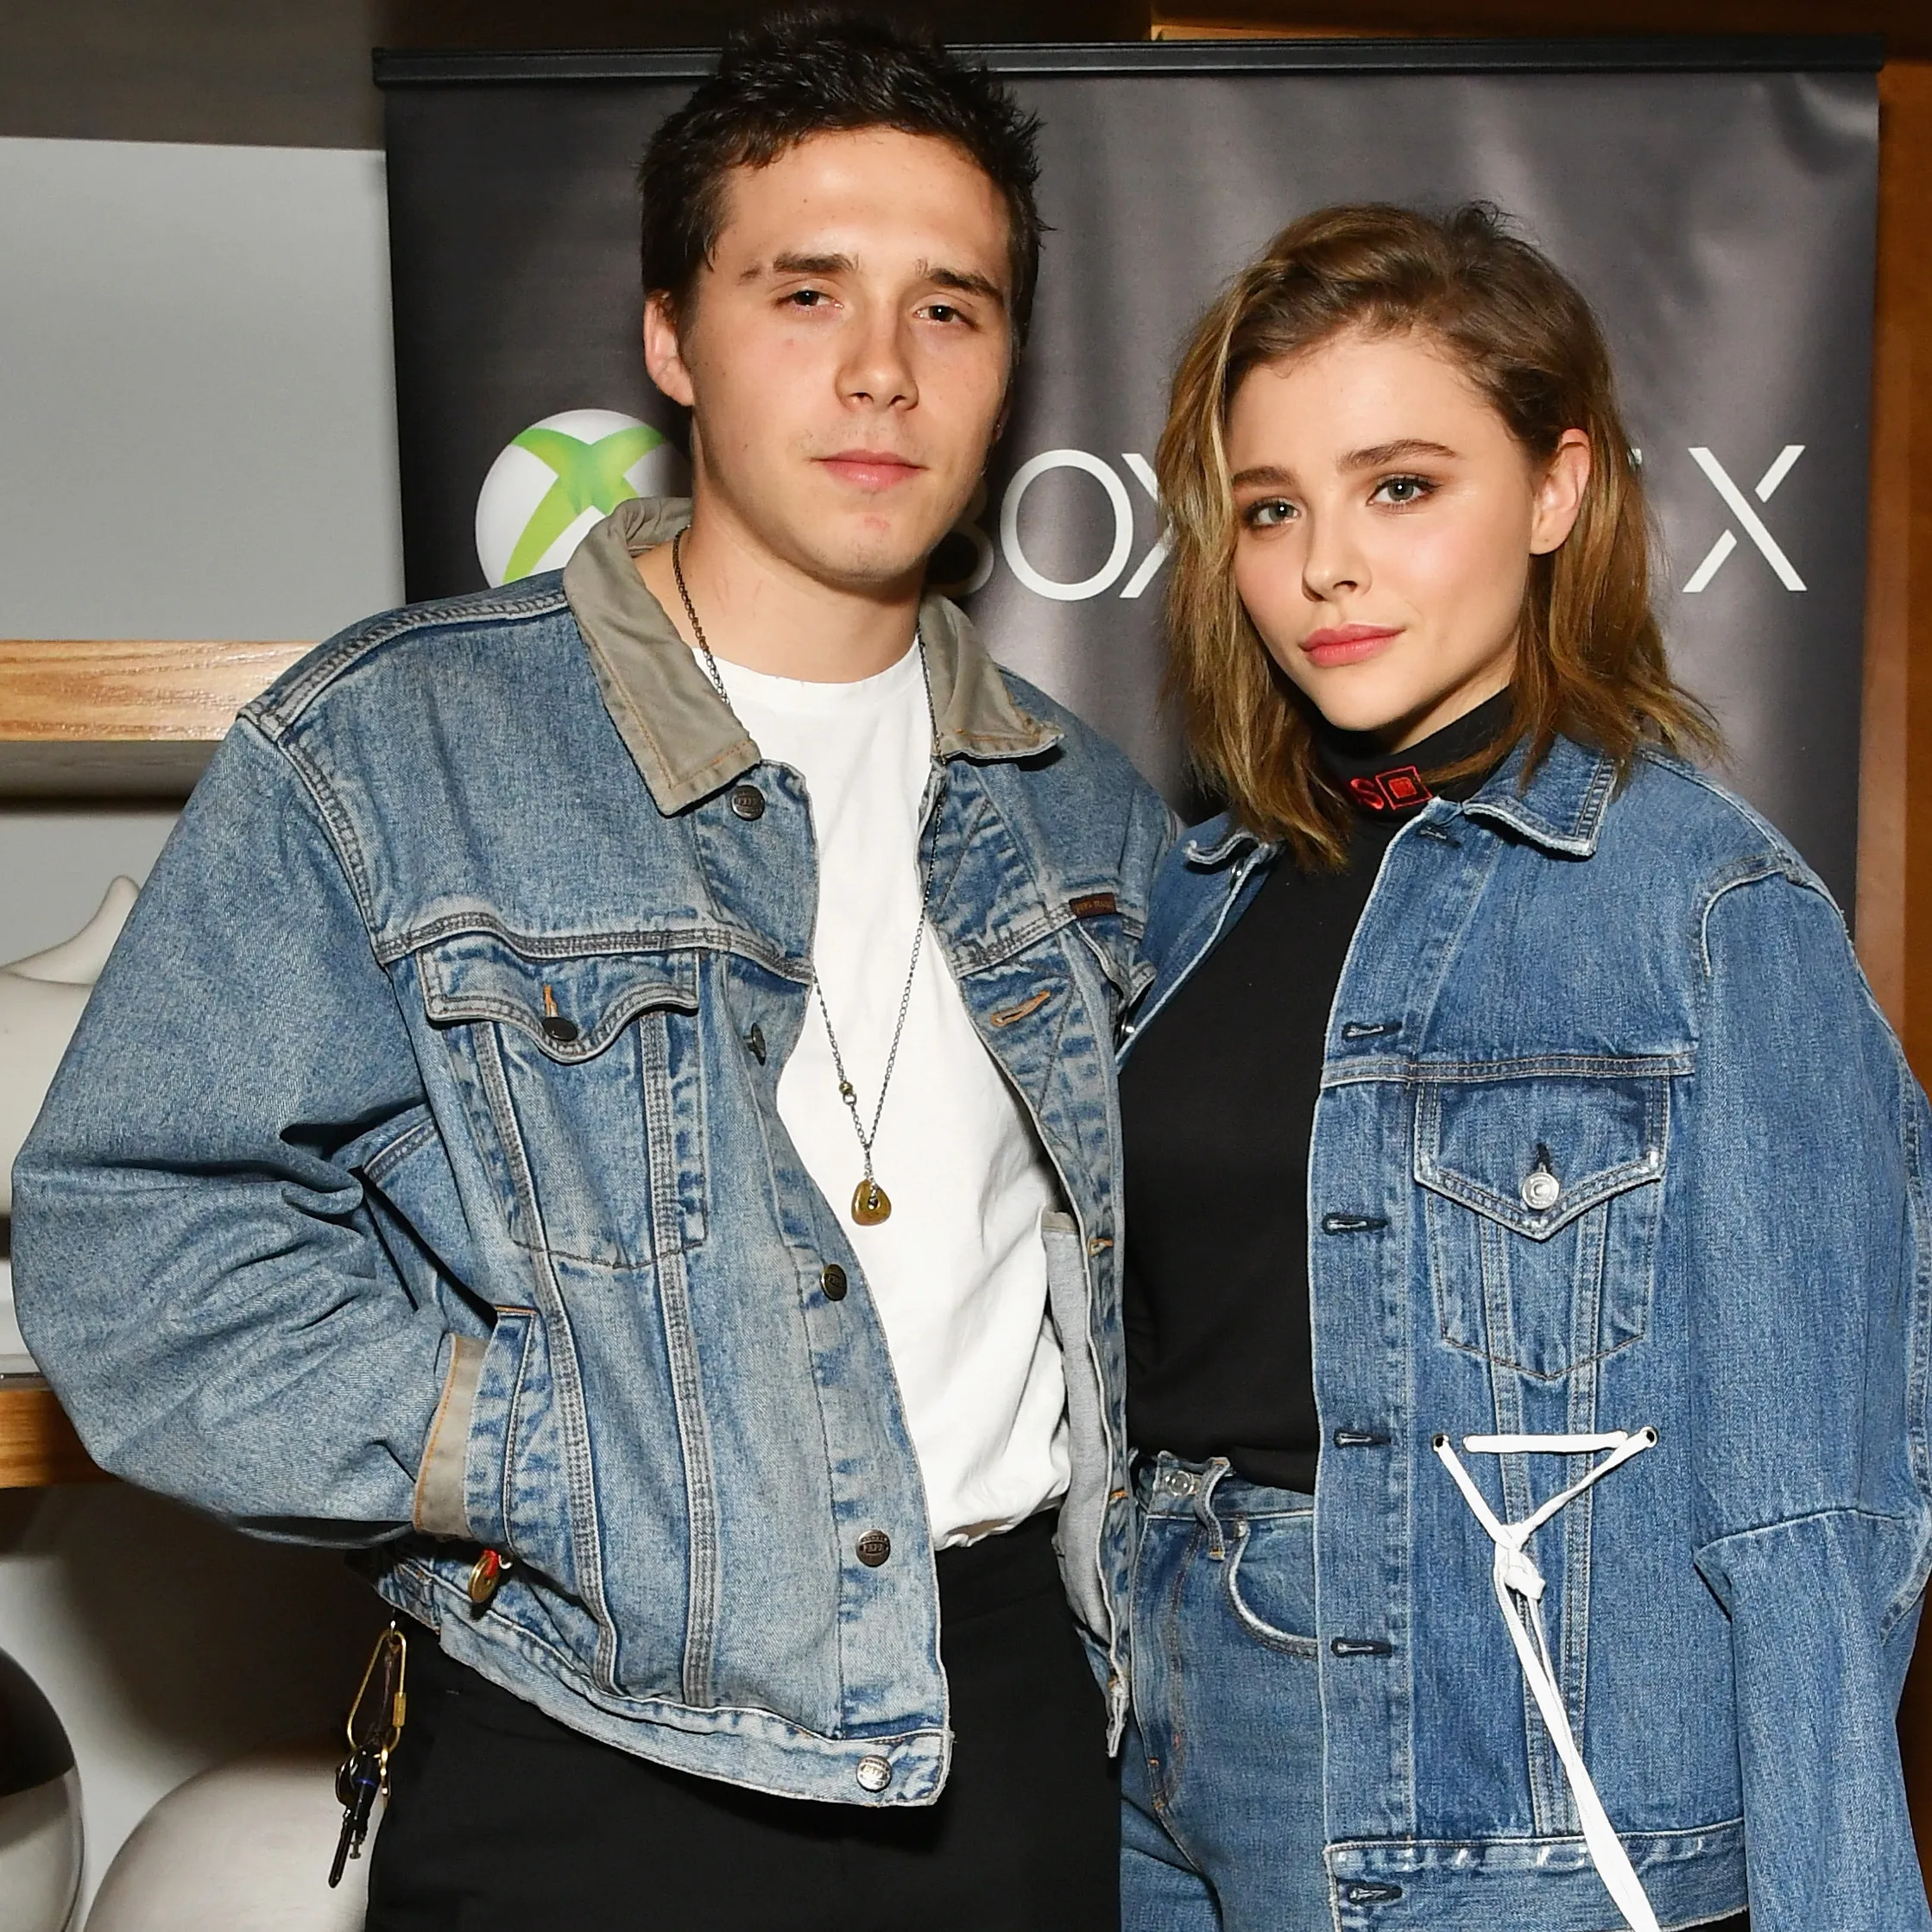 Chloë Grace Moretz and Brooklyn Beckham Coordinating Denim Outfits at X Box One Event. 